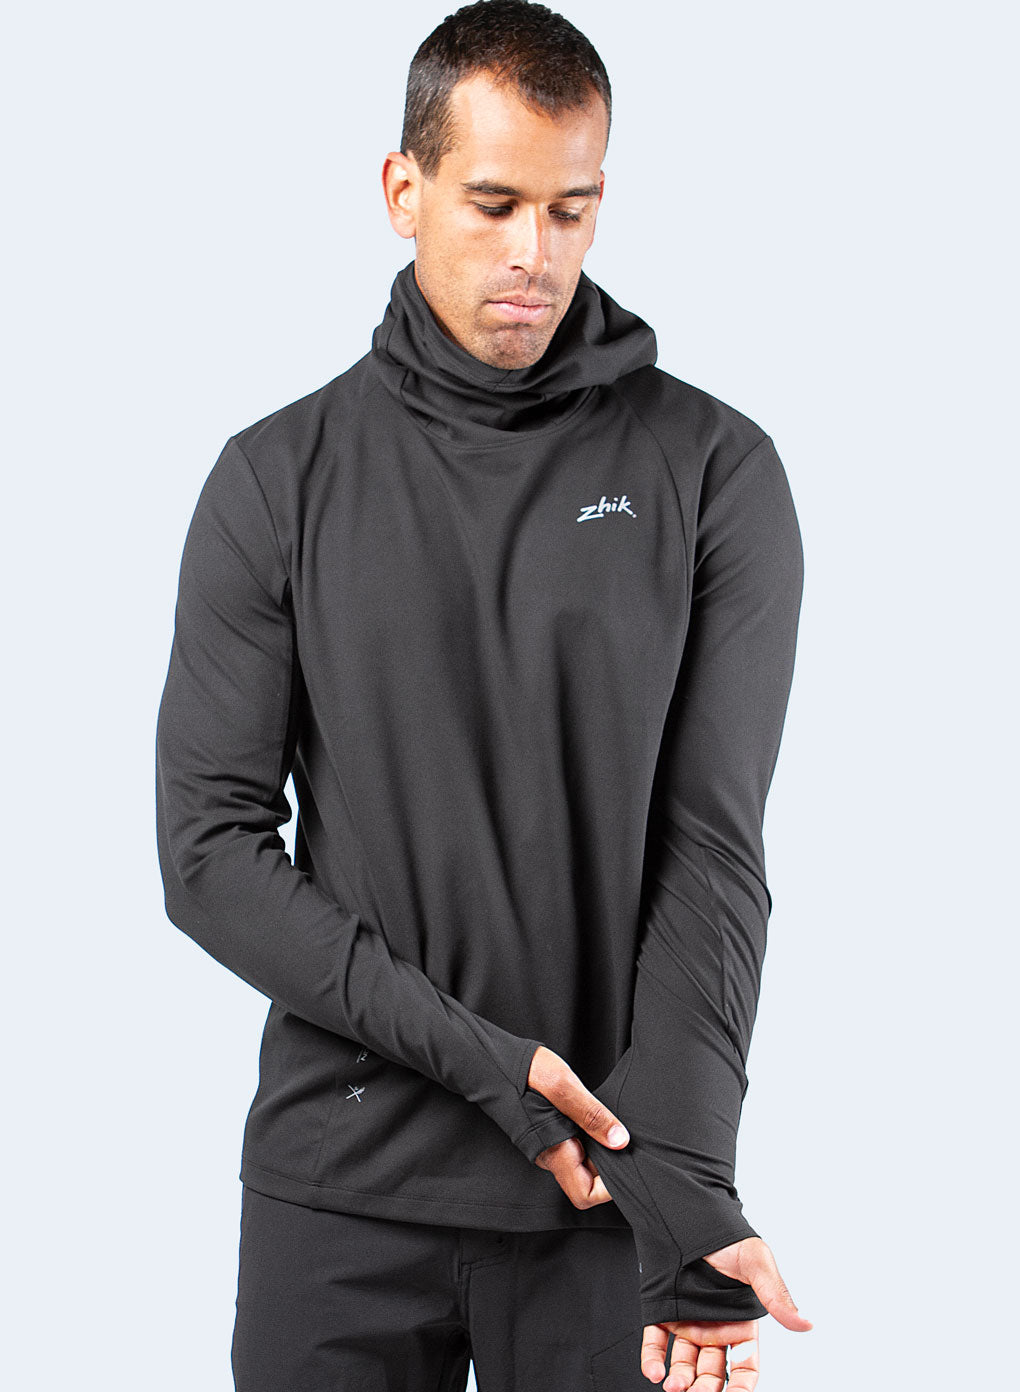 ZHIKMotion Mens Hooded Top